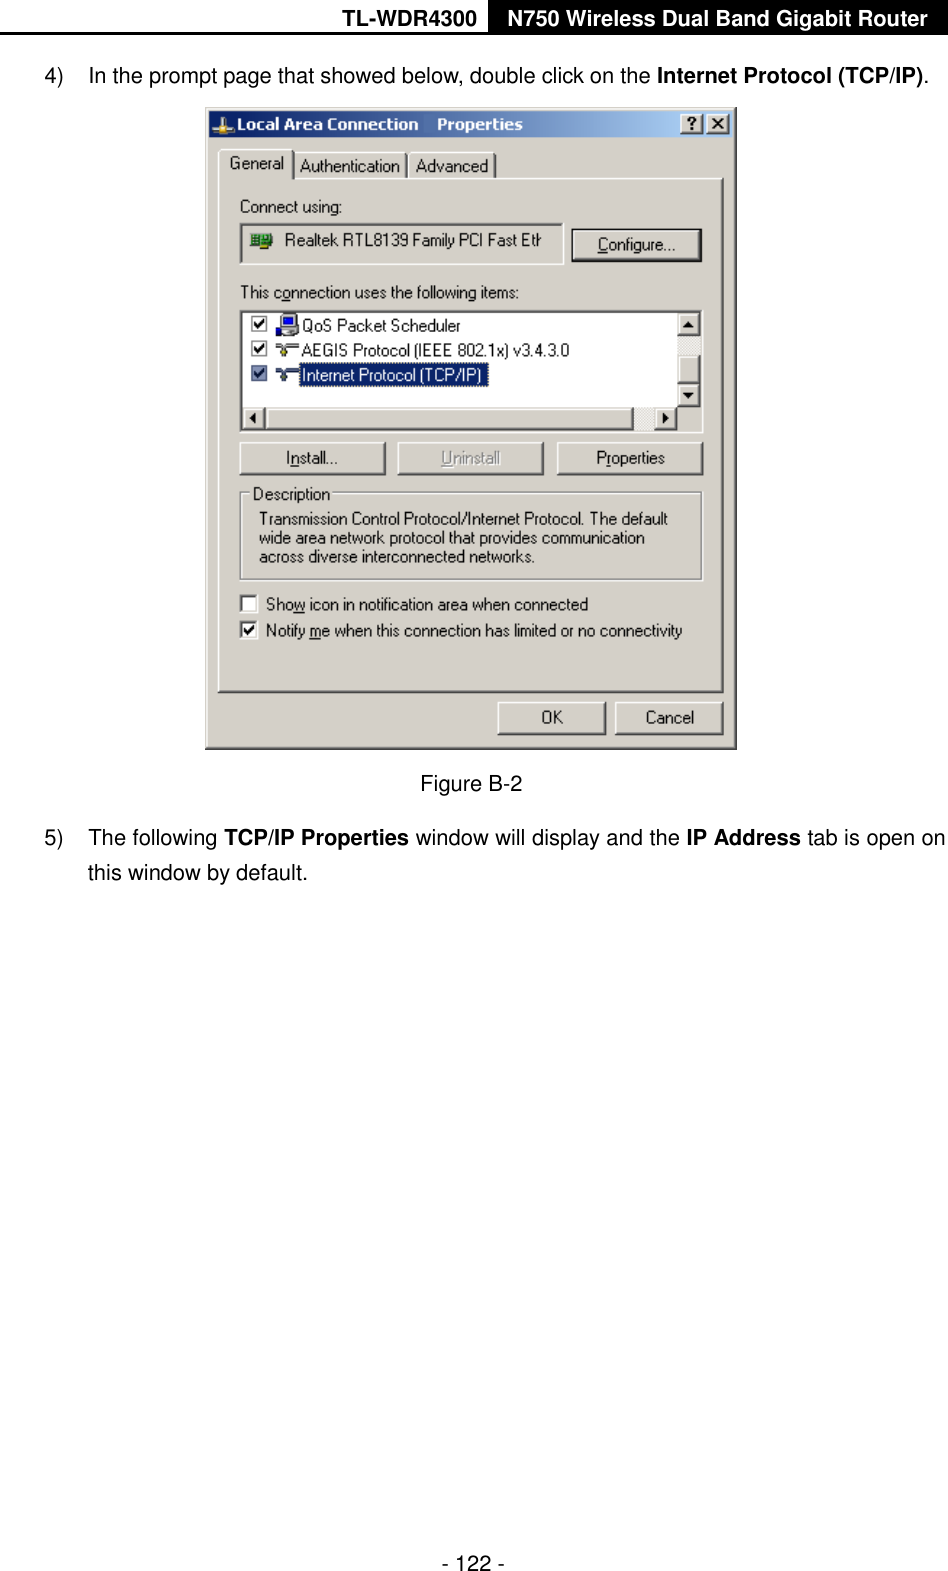 TL-WDR4300 N750 Wireless Dual Band Gigabit Router  - 122 - 4)  In the prompt page that showed below, double click on the Internet Protocol (TCP/IP).  Figure B-2 5)  The following TCP/IP Properties window will display and the IP Address tab is open on this window by default. 